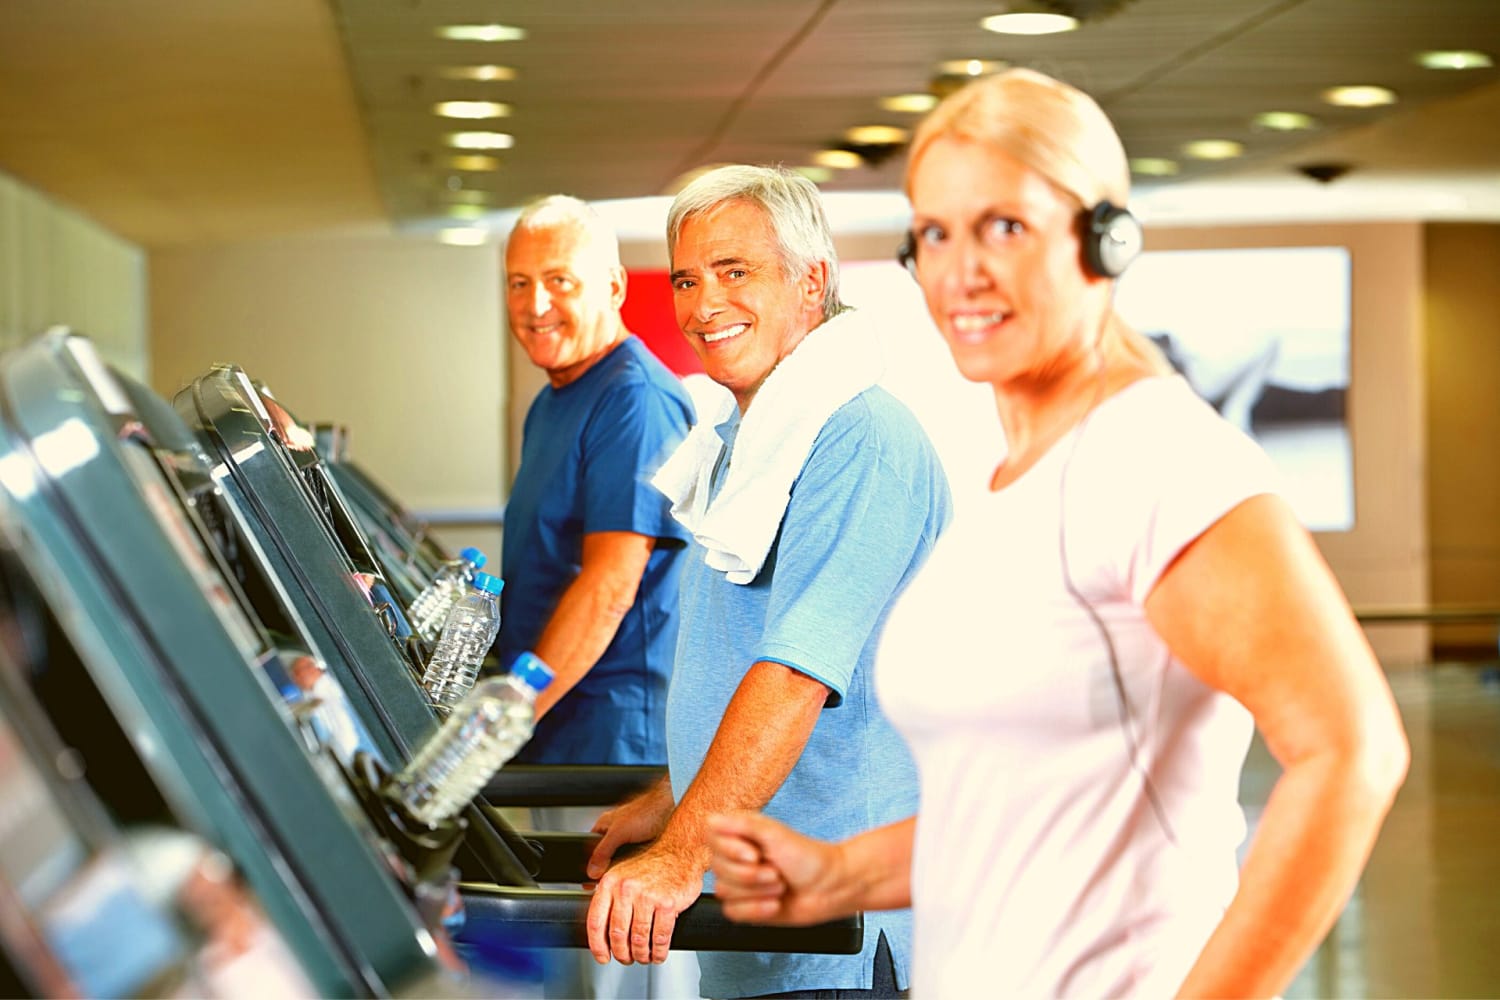 Top Five Best Treadmills For Seniors – Reviews & Buyers Guide